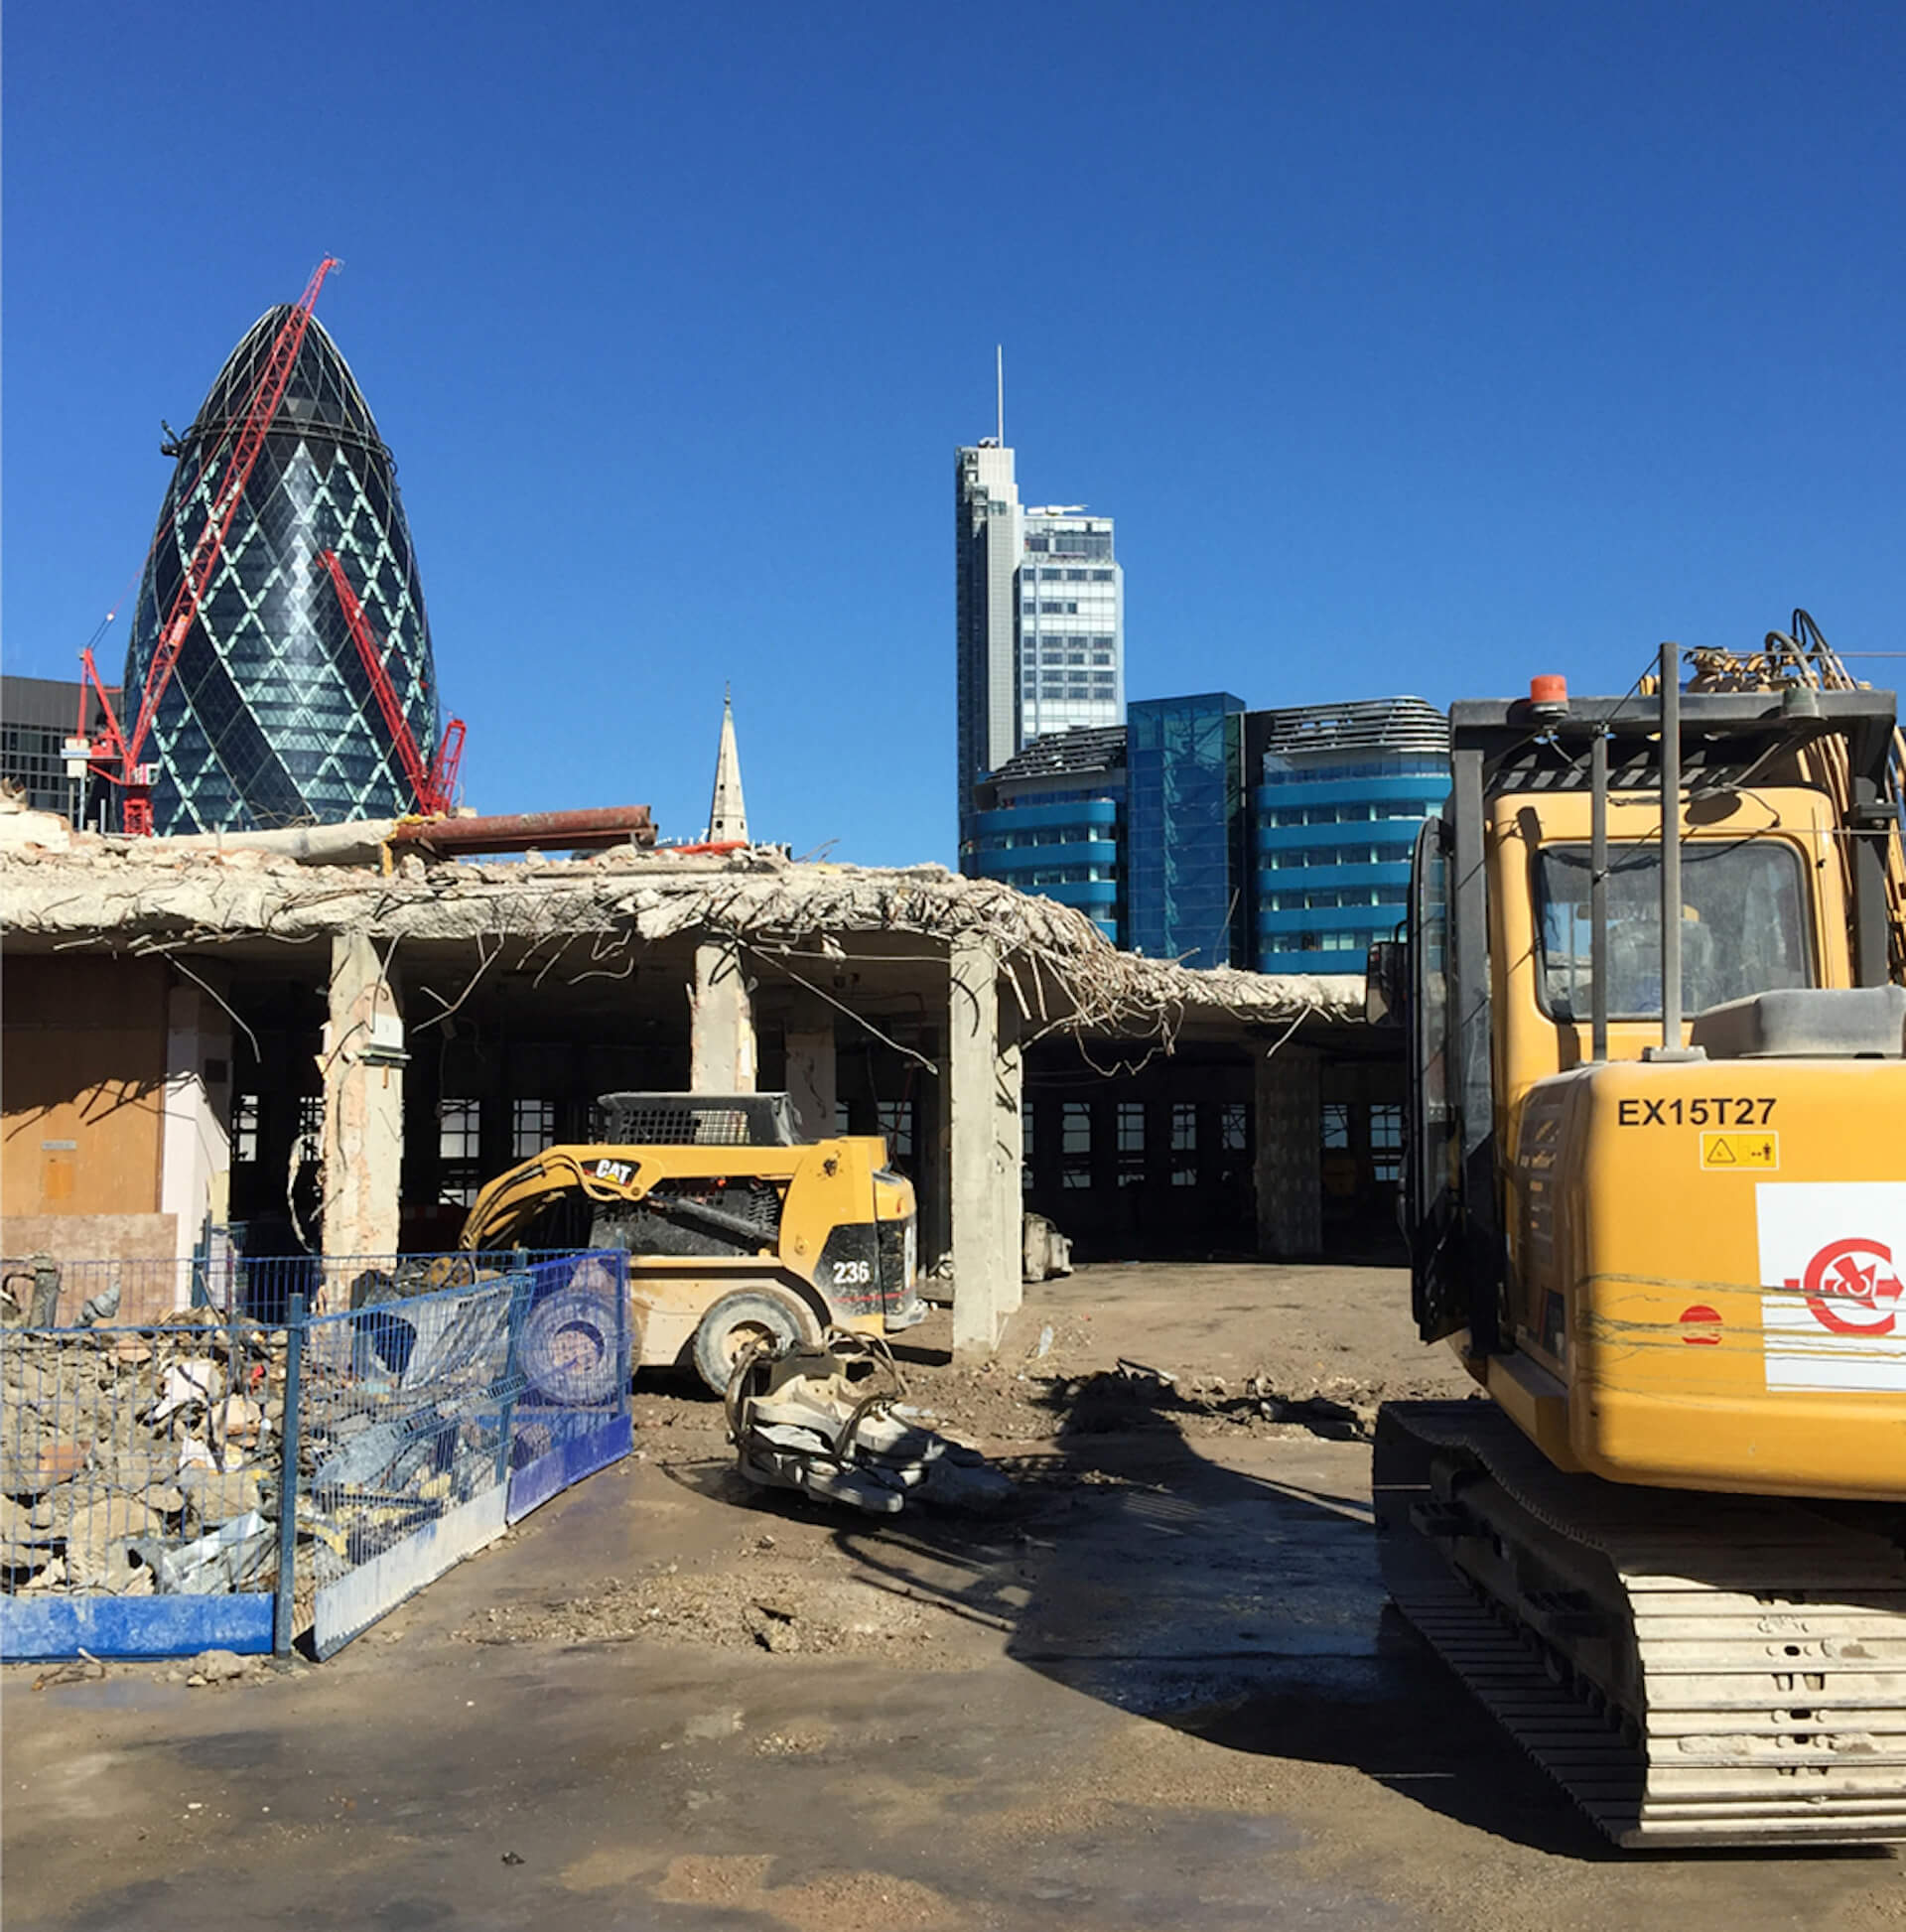 A demolition scene in the middle of a city. London office buildings in the background. construction machinery next to a partially demolished building.